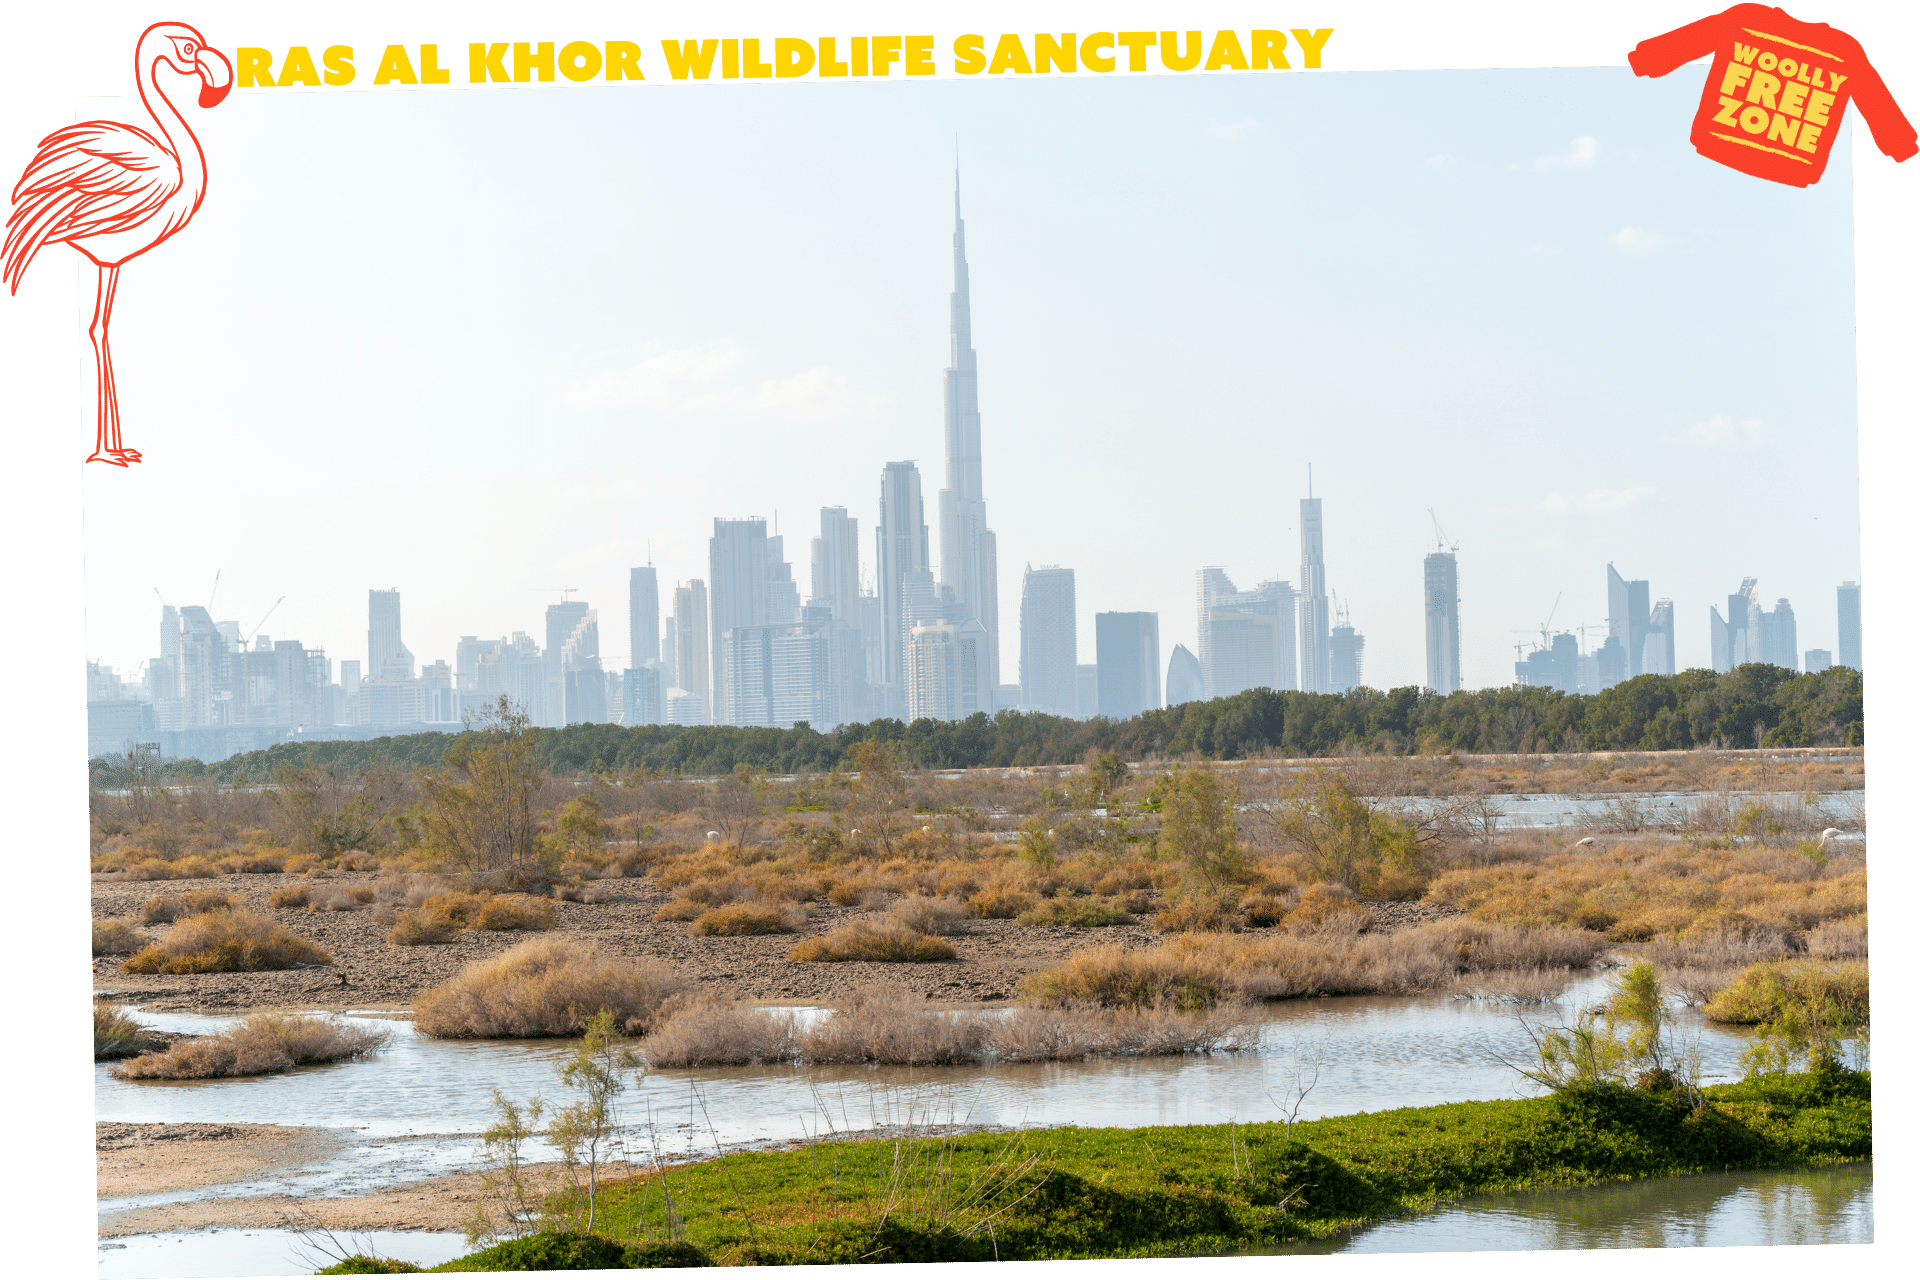 The Ras Al Khor Wildlife Sanctuary is one of the best free winter activities in Dubai. A low angle short of wetlands with the Dubai skyline in the distance, the Burj Khalifa in the centre.